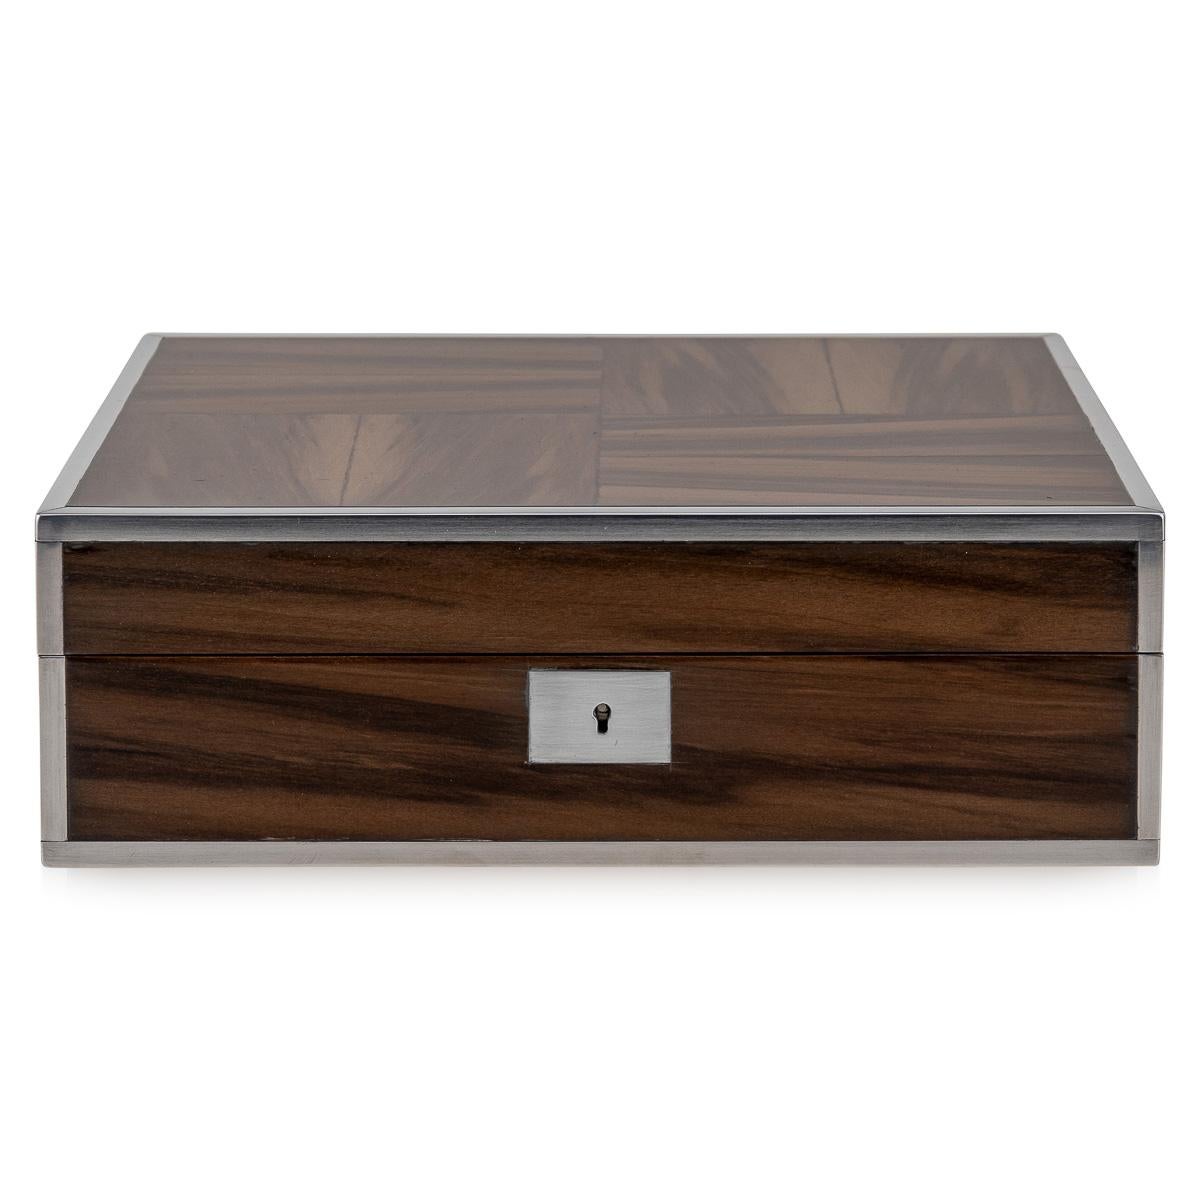 Featuring a sleek contemporary design, this piece showcases smoked walnut veneer over a solid walnut structure, complemented by sturdy stainless steel hinges and a lock adorned with aluminium accents. Upon opening, it reveals a meticulously crafted